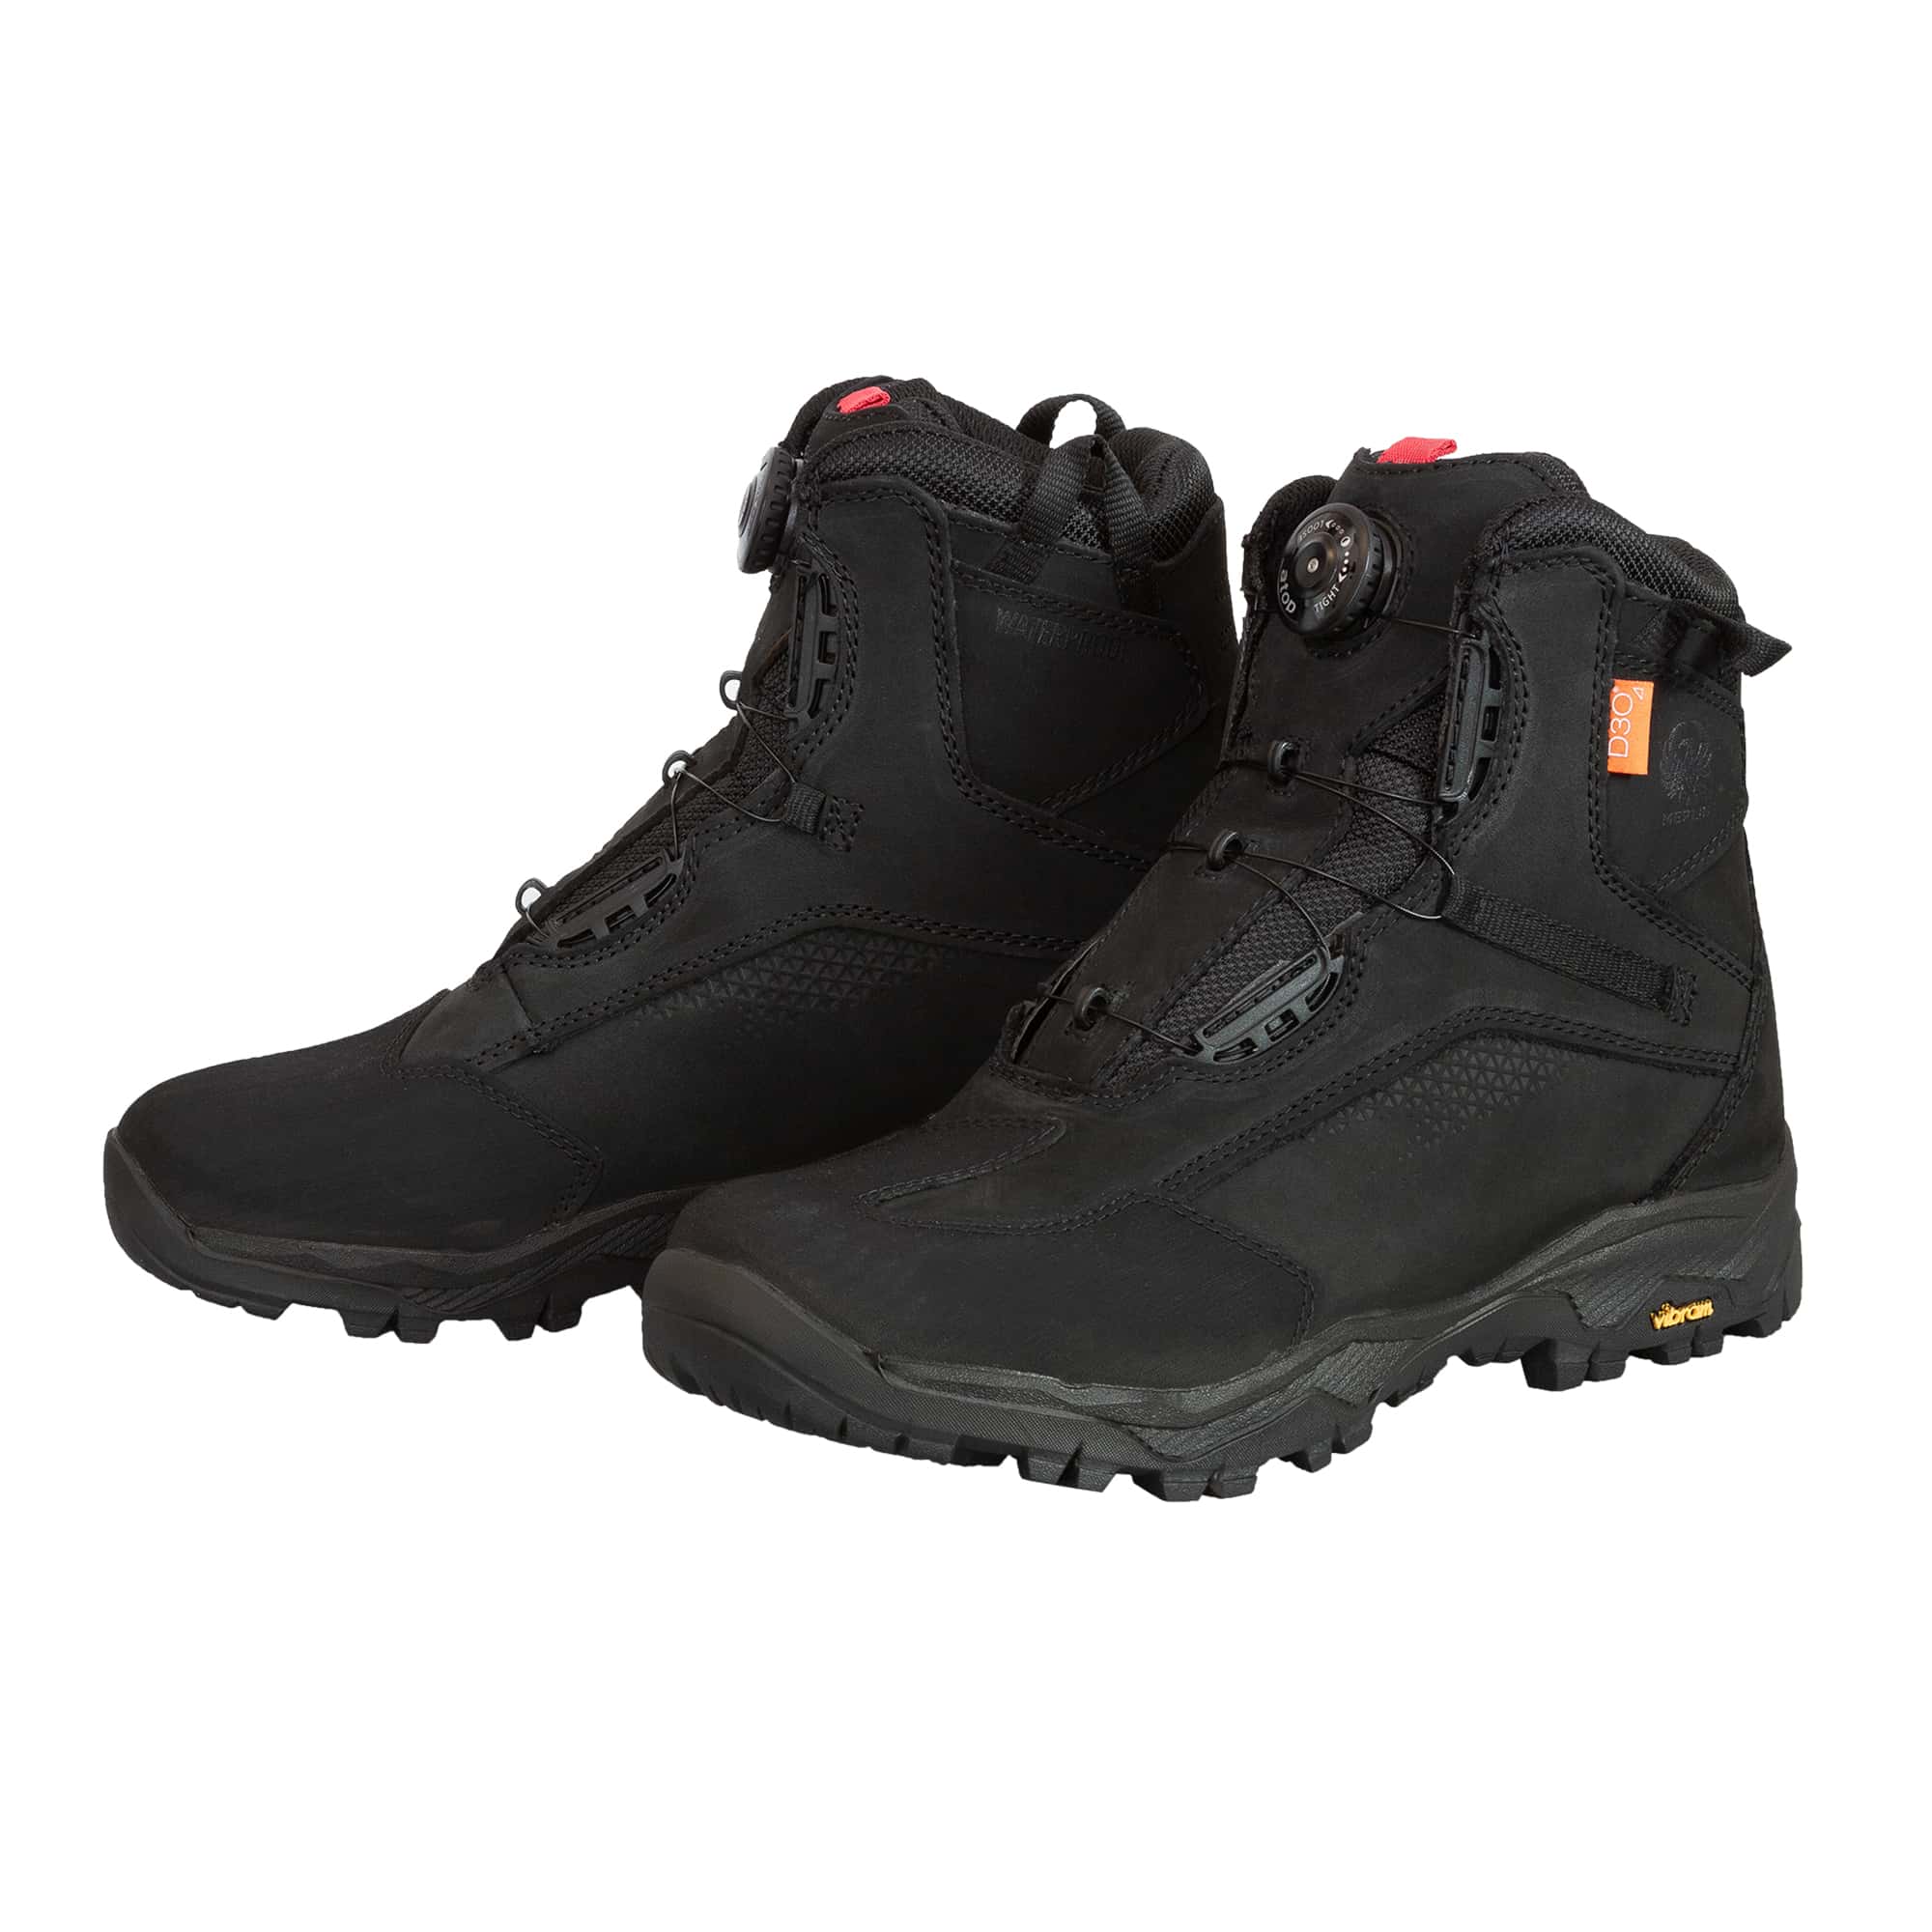 The Winter Boots Guide: Sierra